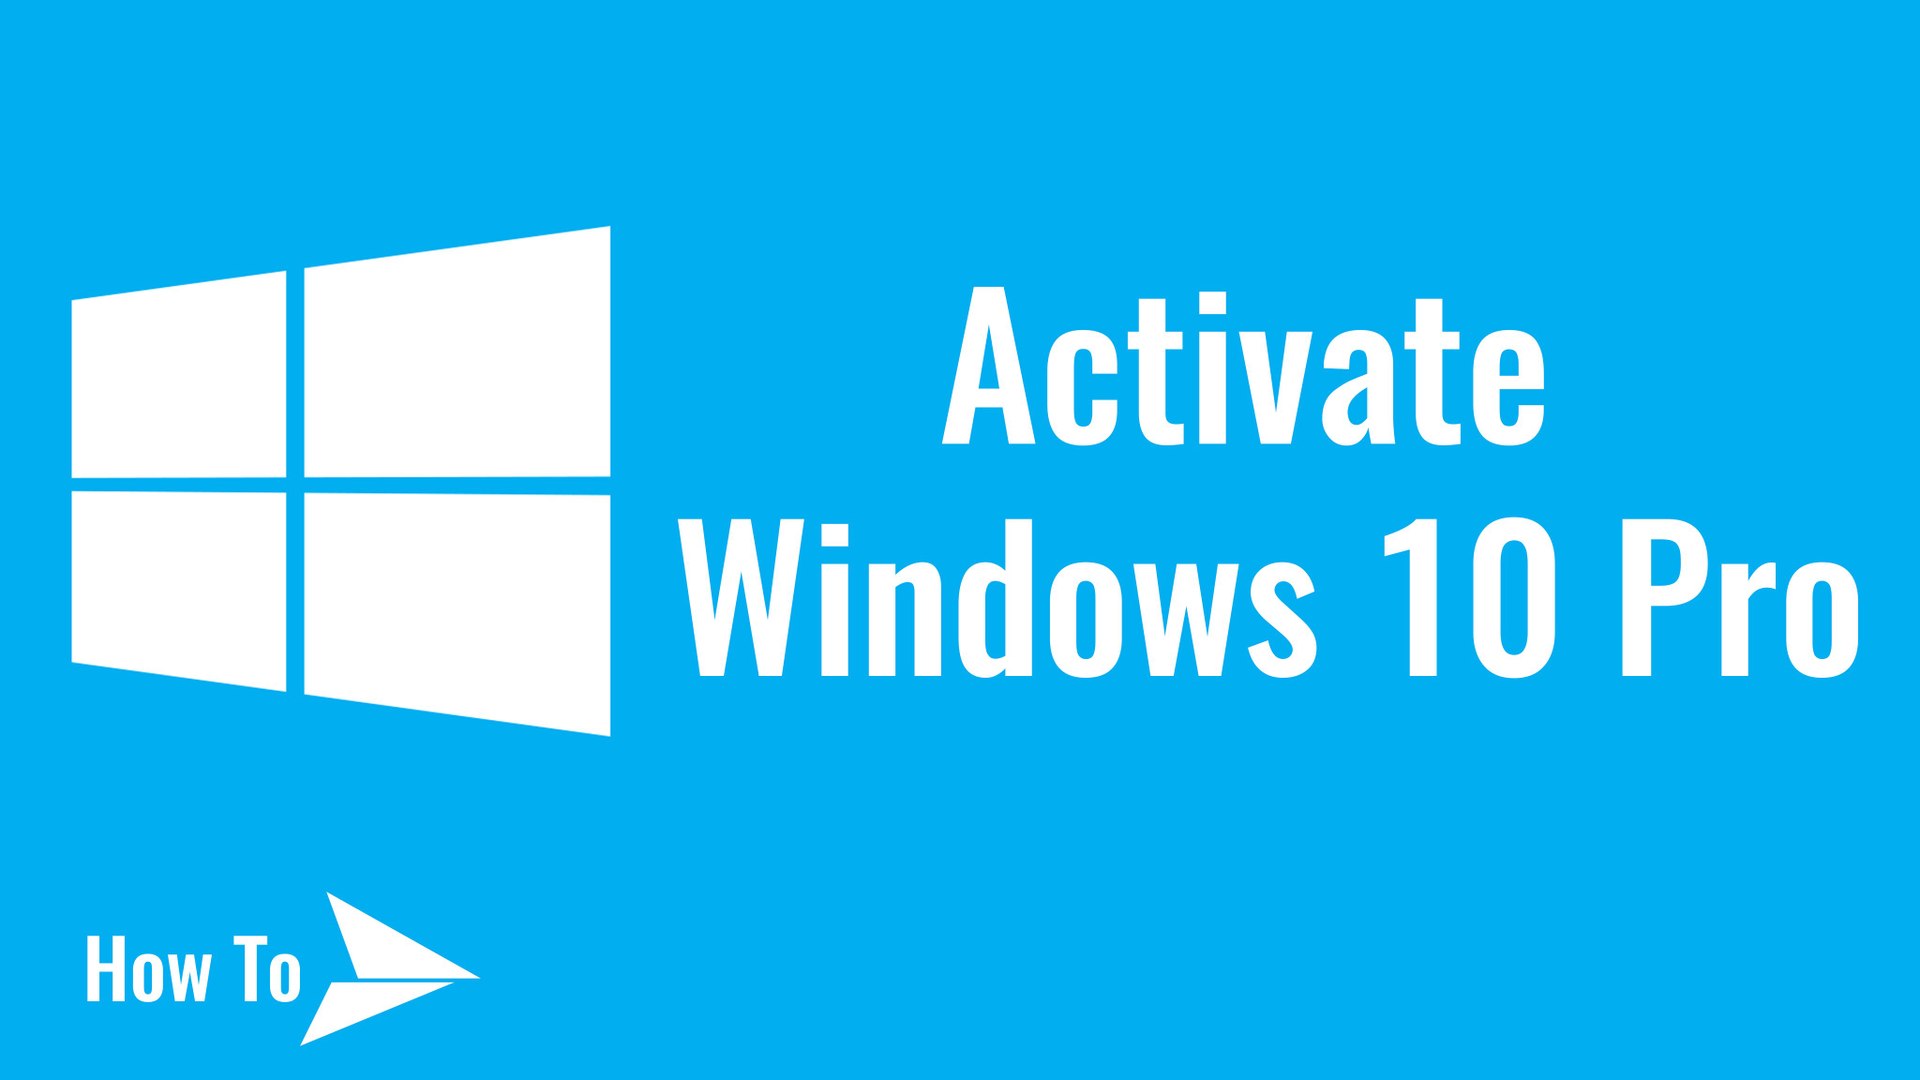 activate windows 10 pro freeroduct key product